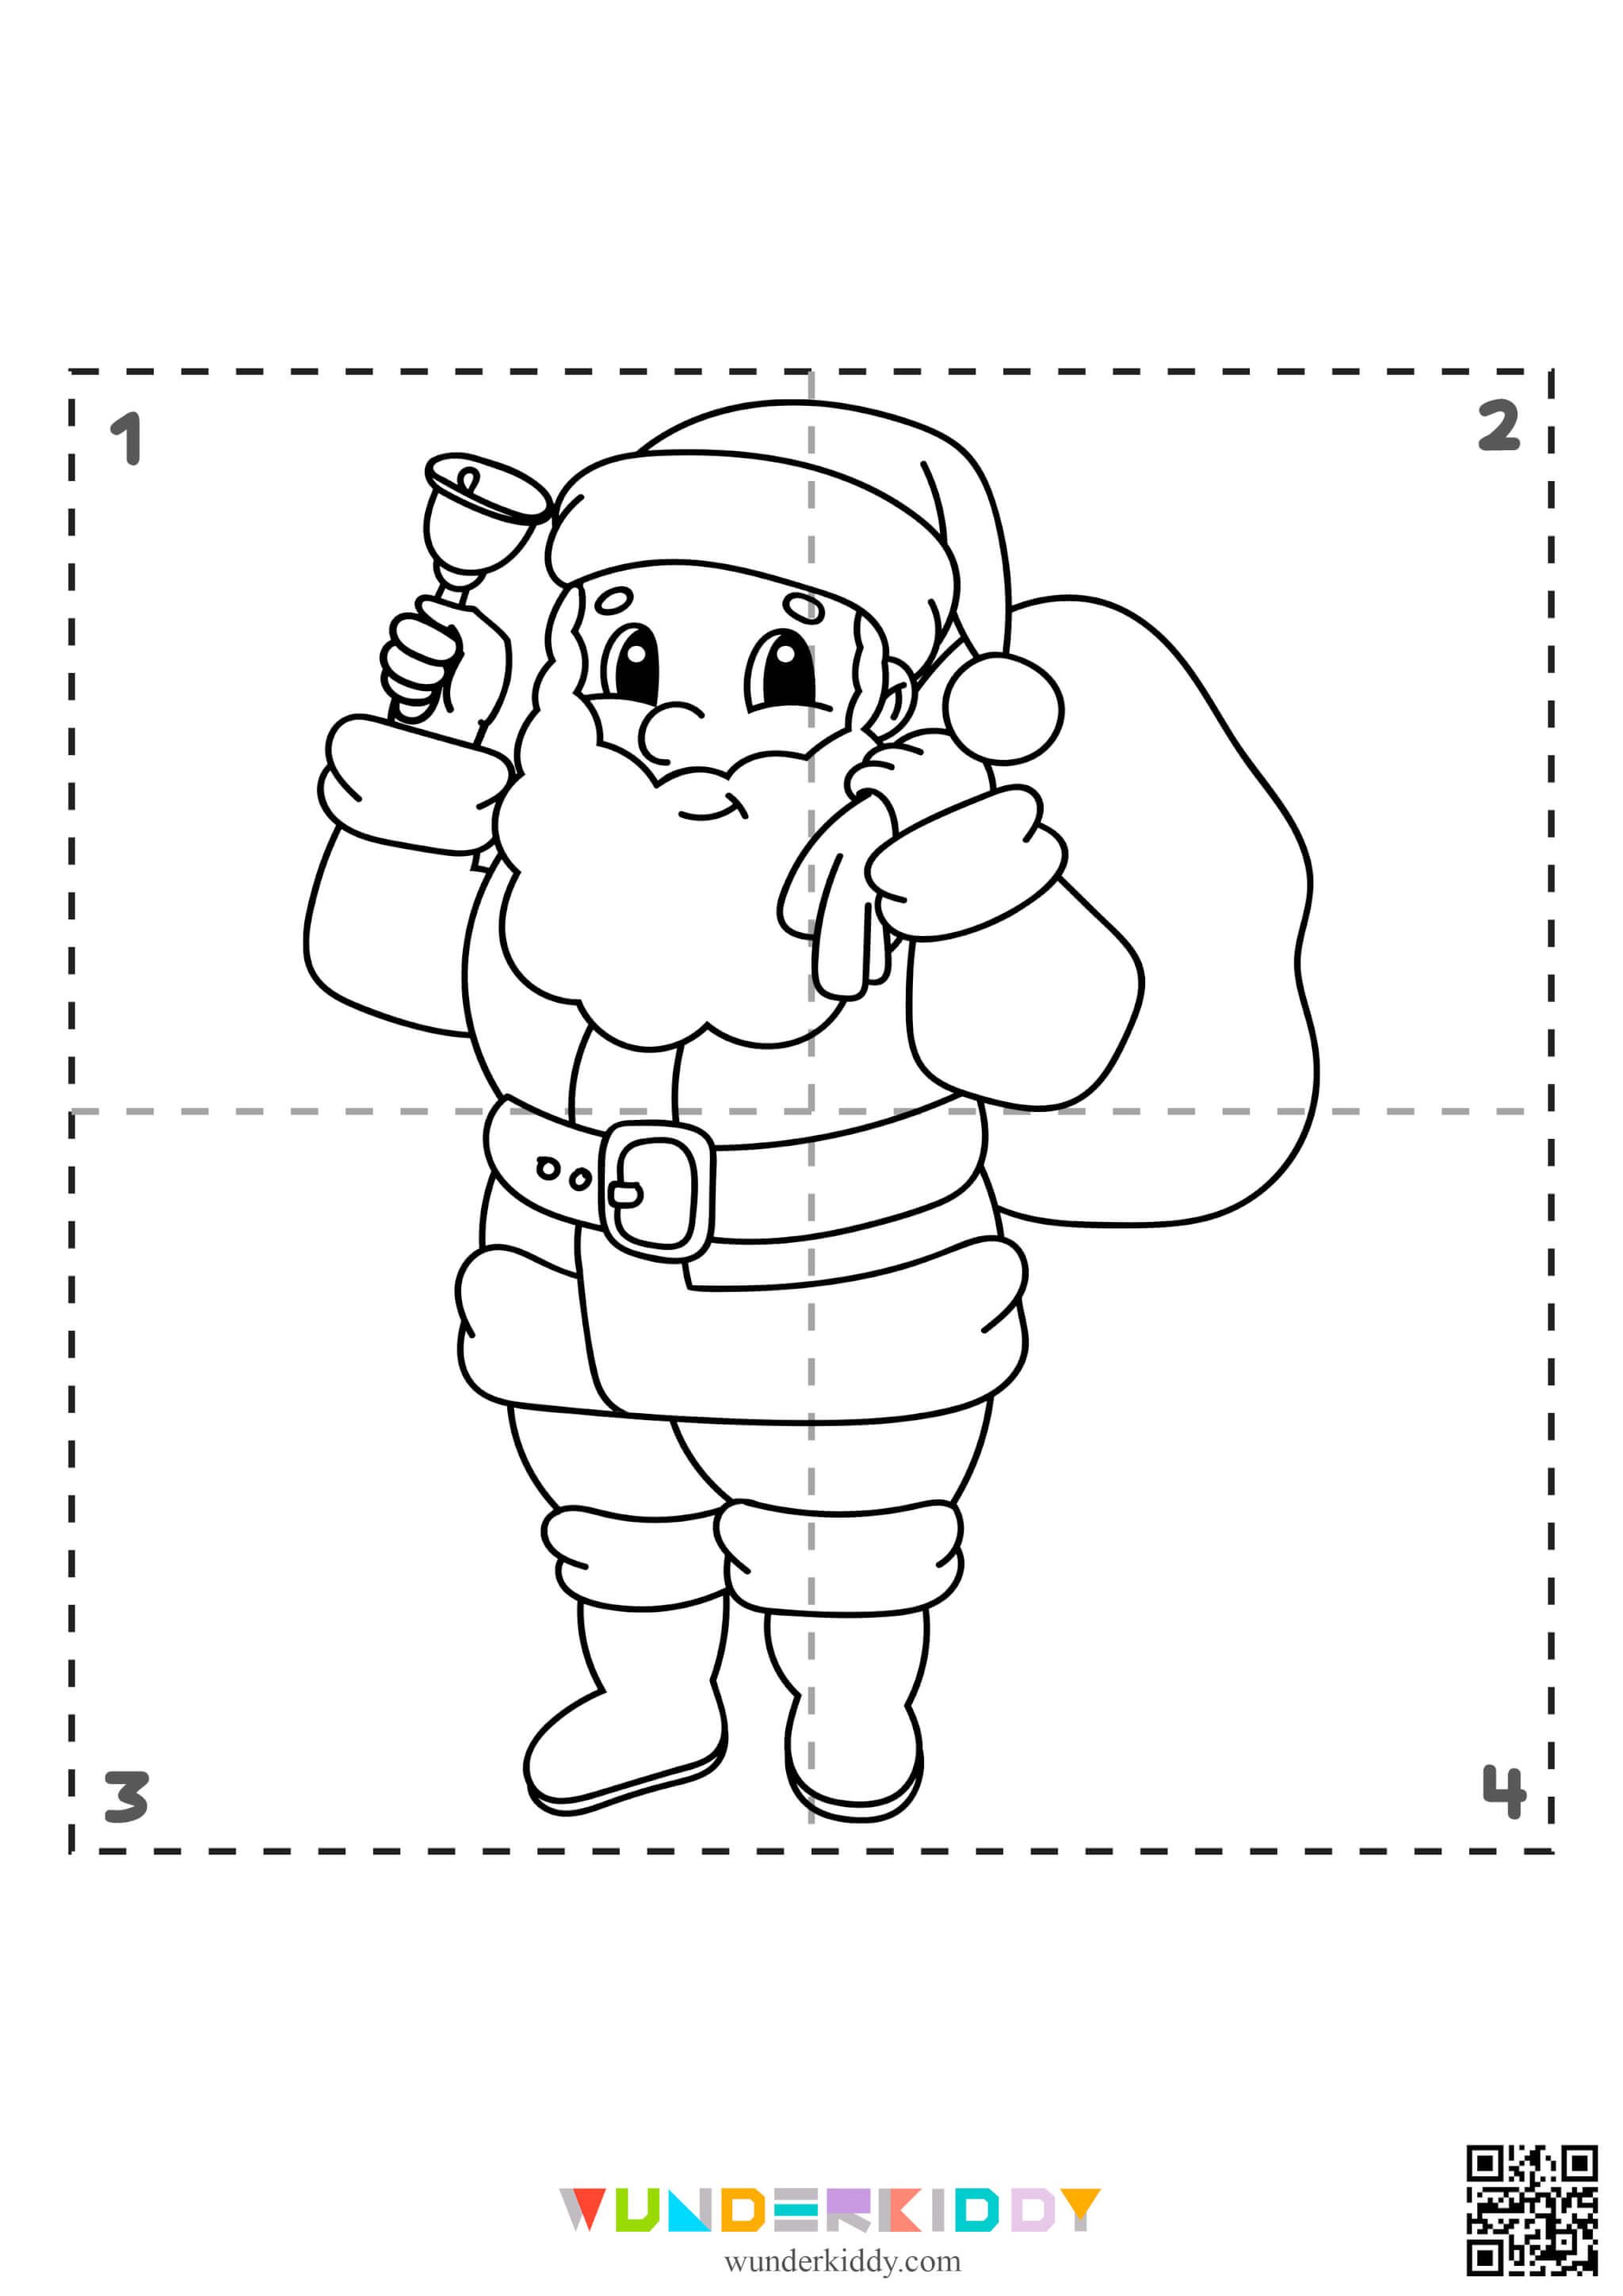 Coloring pages «New Year's Puzzle» - Image 9